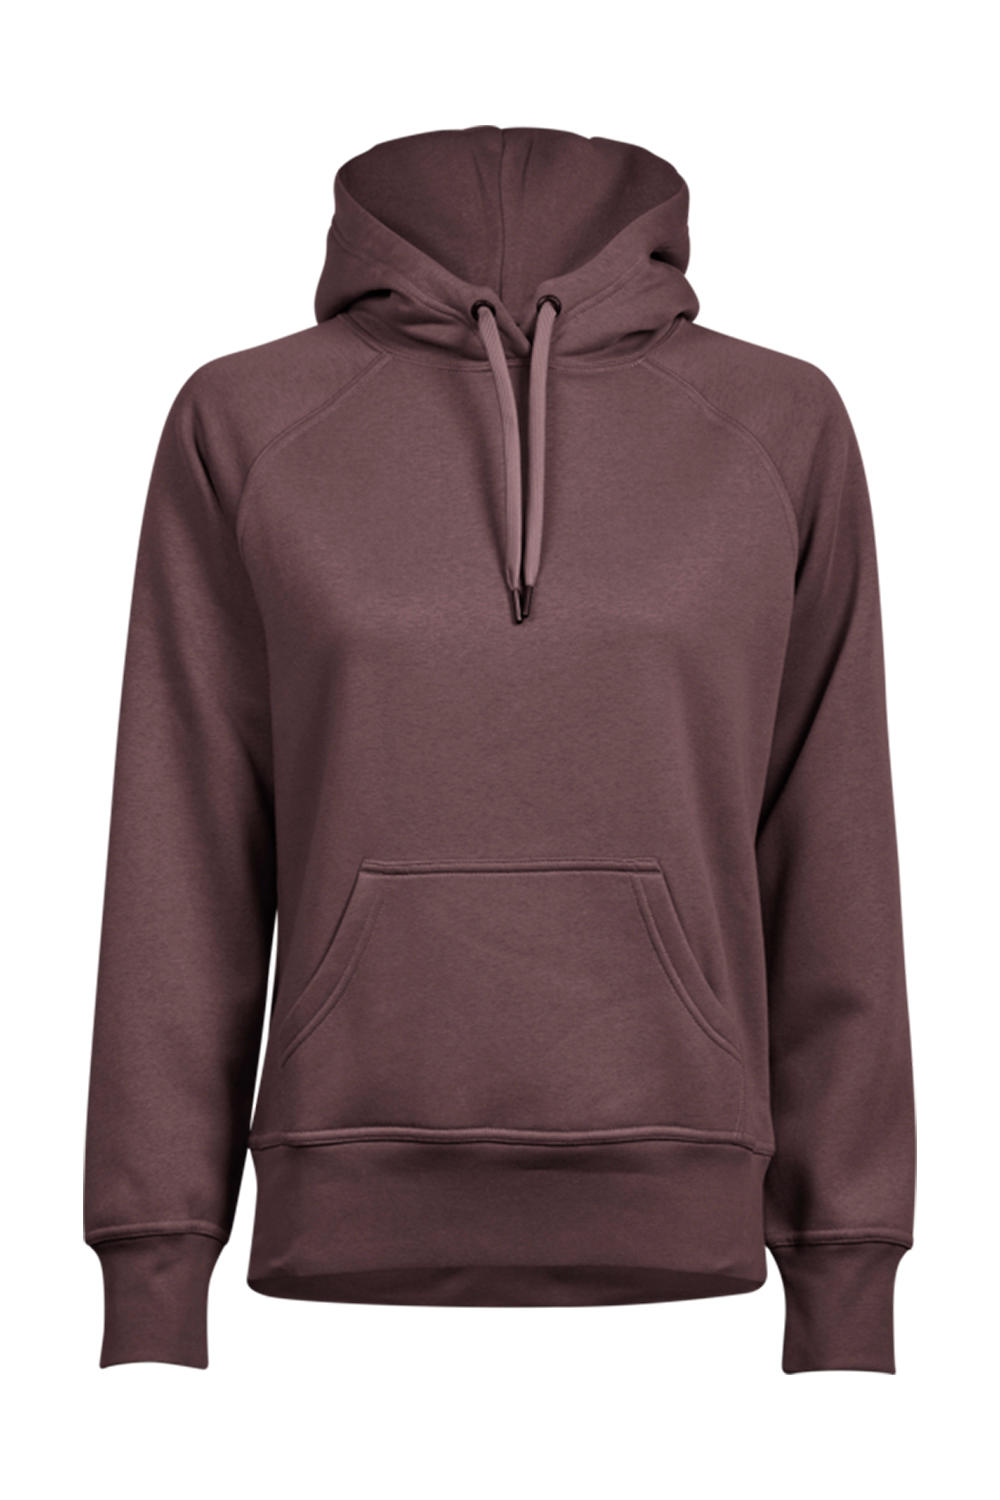  Ladies Hooded Sweat in Farbe Grape